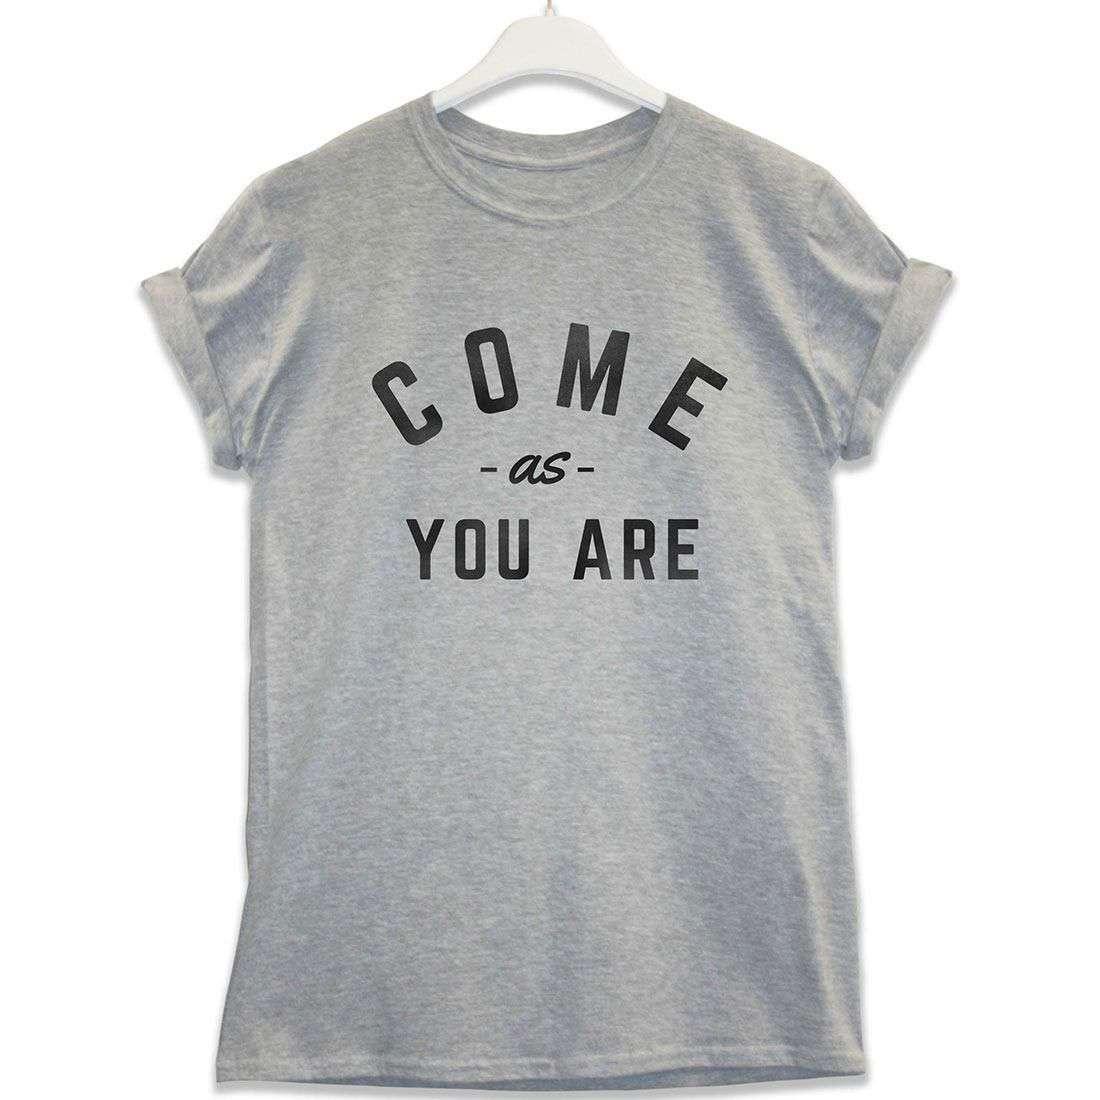 Come As You Are Graphic T-Shirt For Men 8Ball